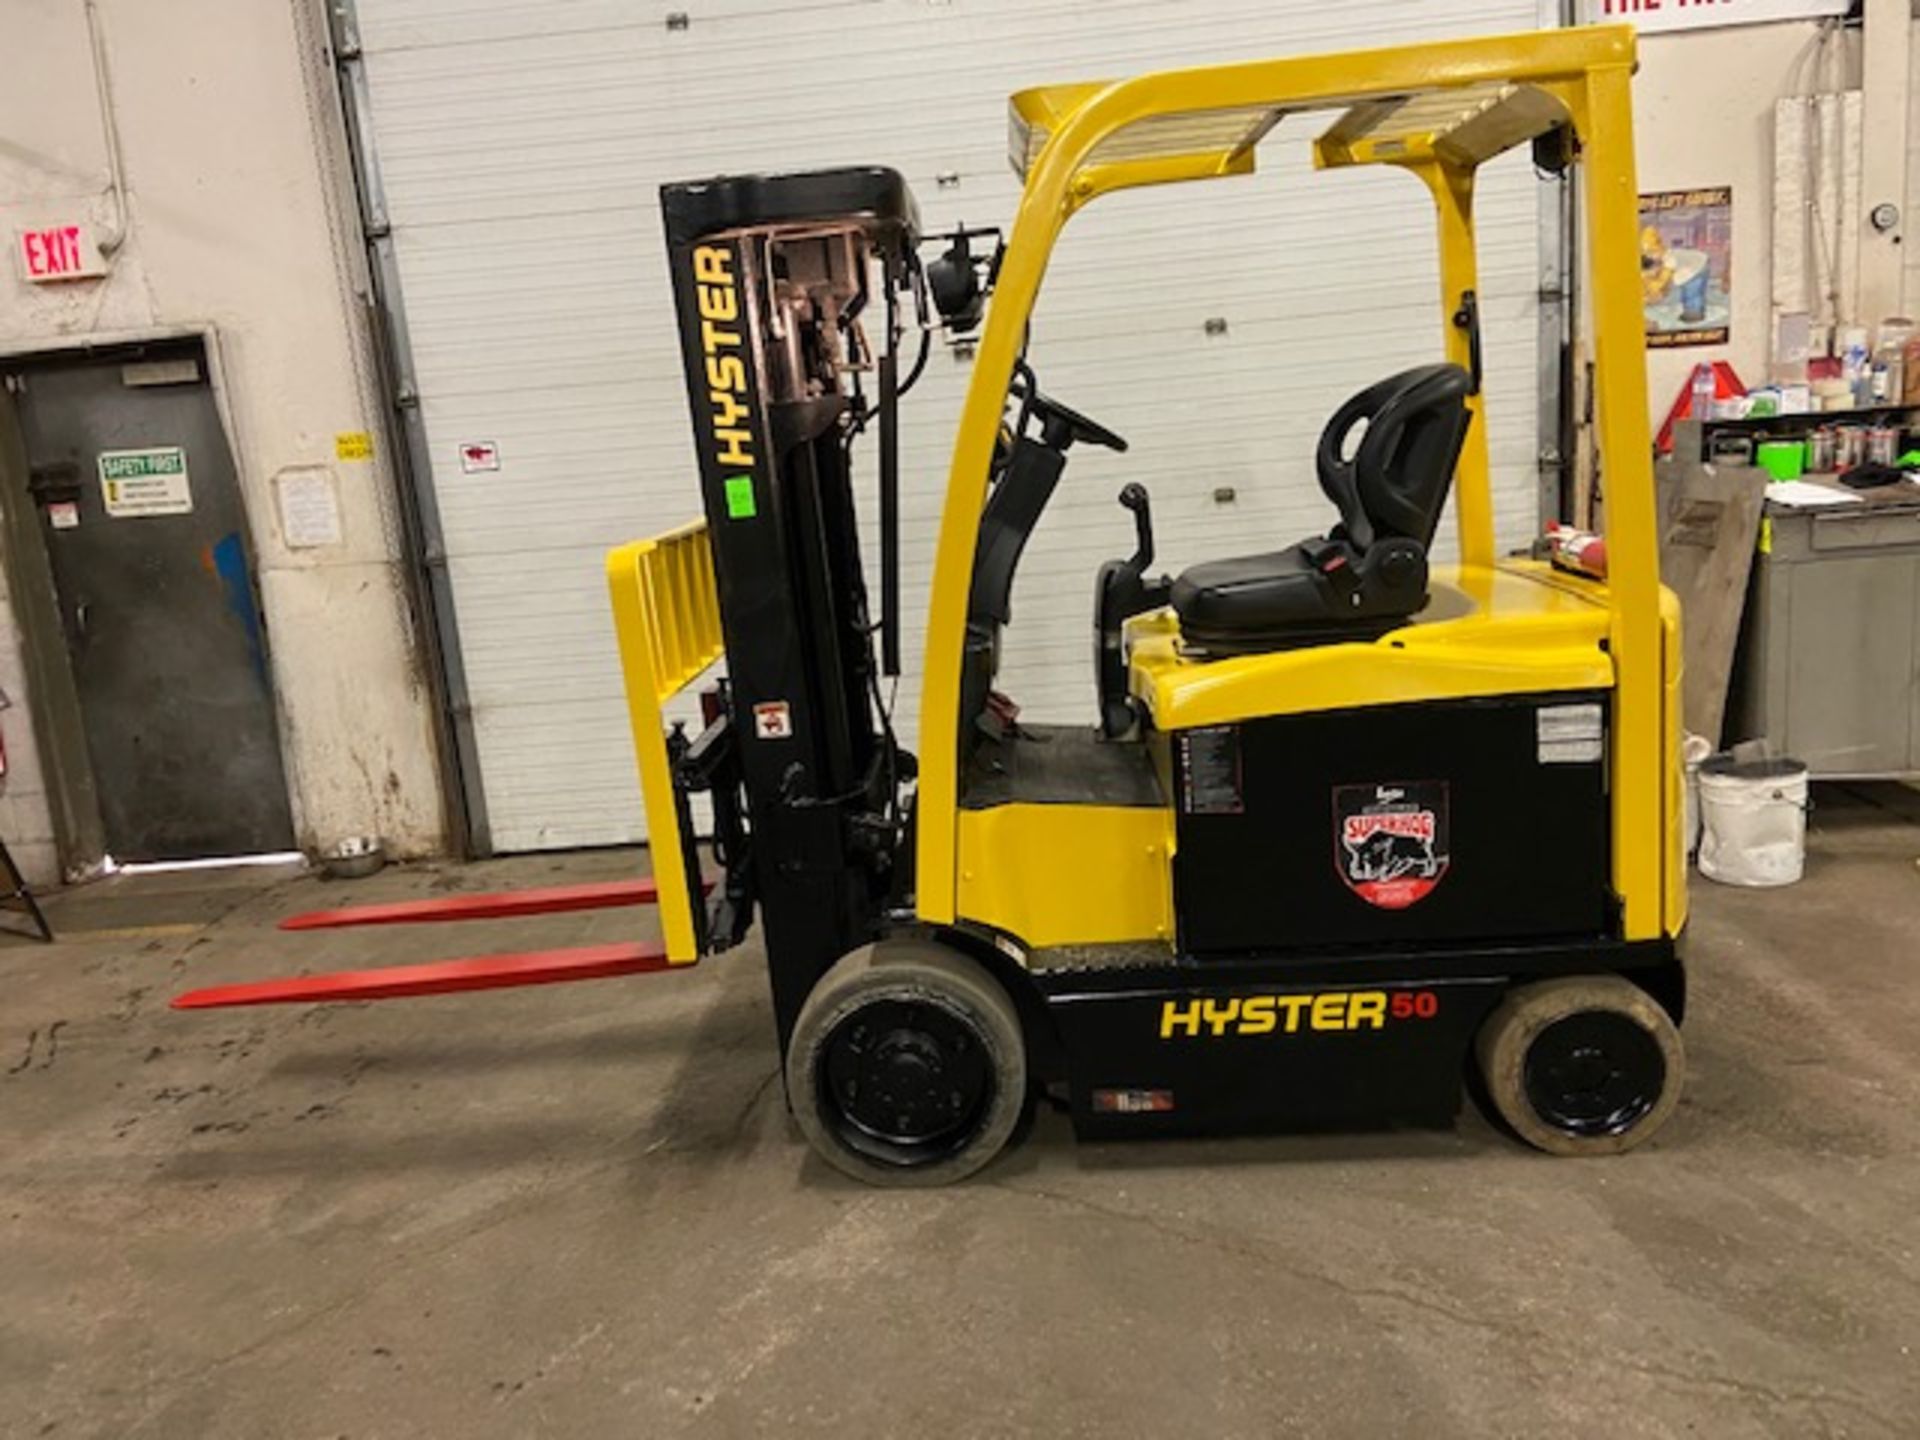 FREE CUSTOMS - 2014 Hyster 5000lbs Capacity Forklift Electric with 4-STAGE MAST with sideshift &